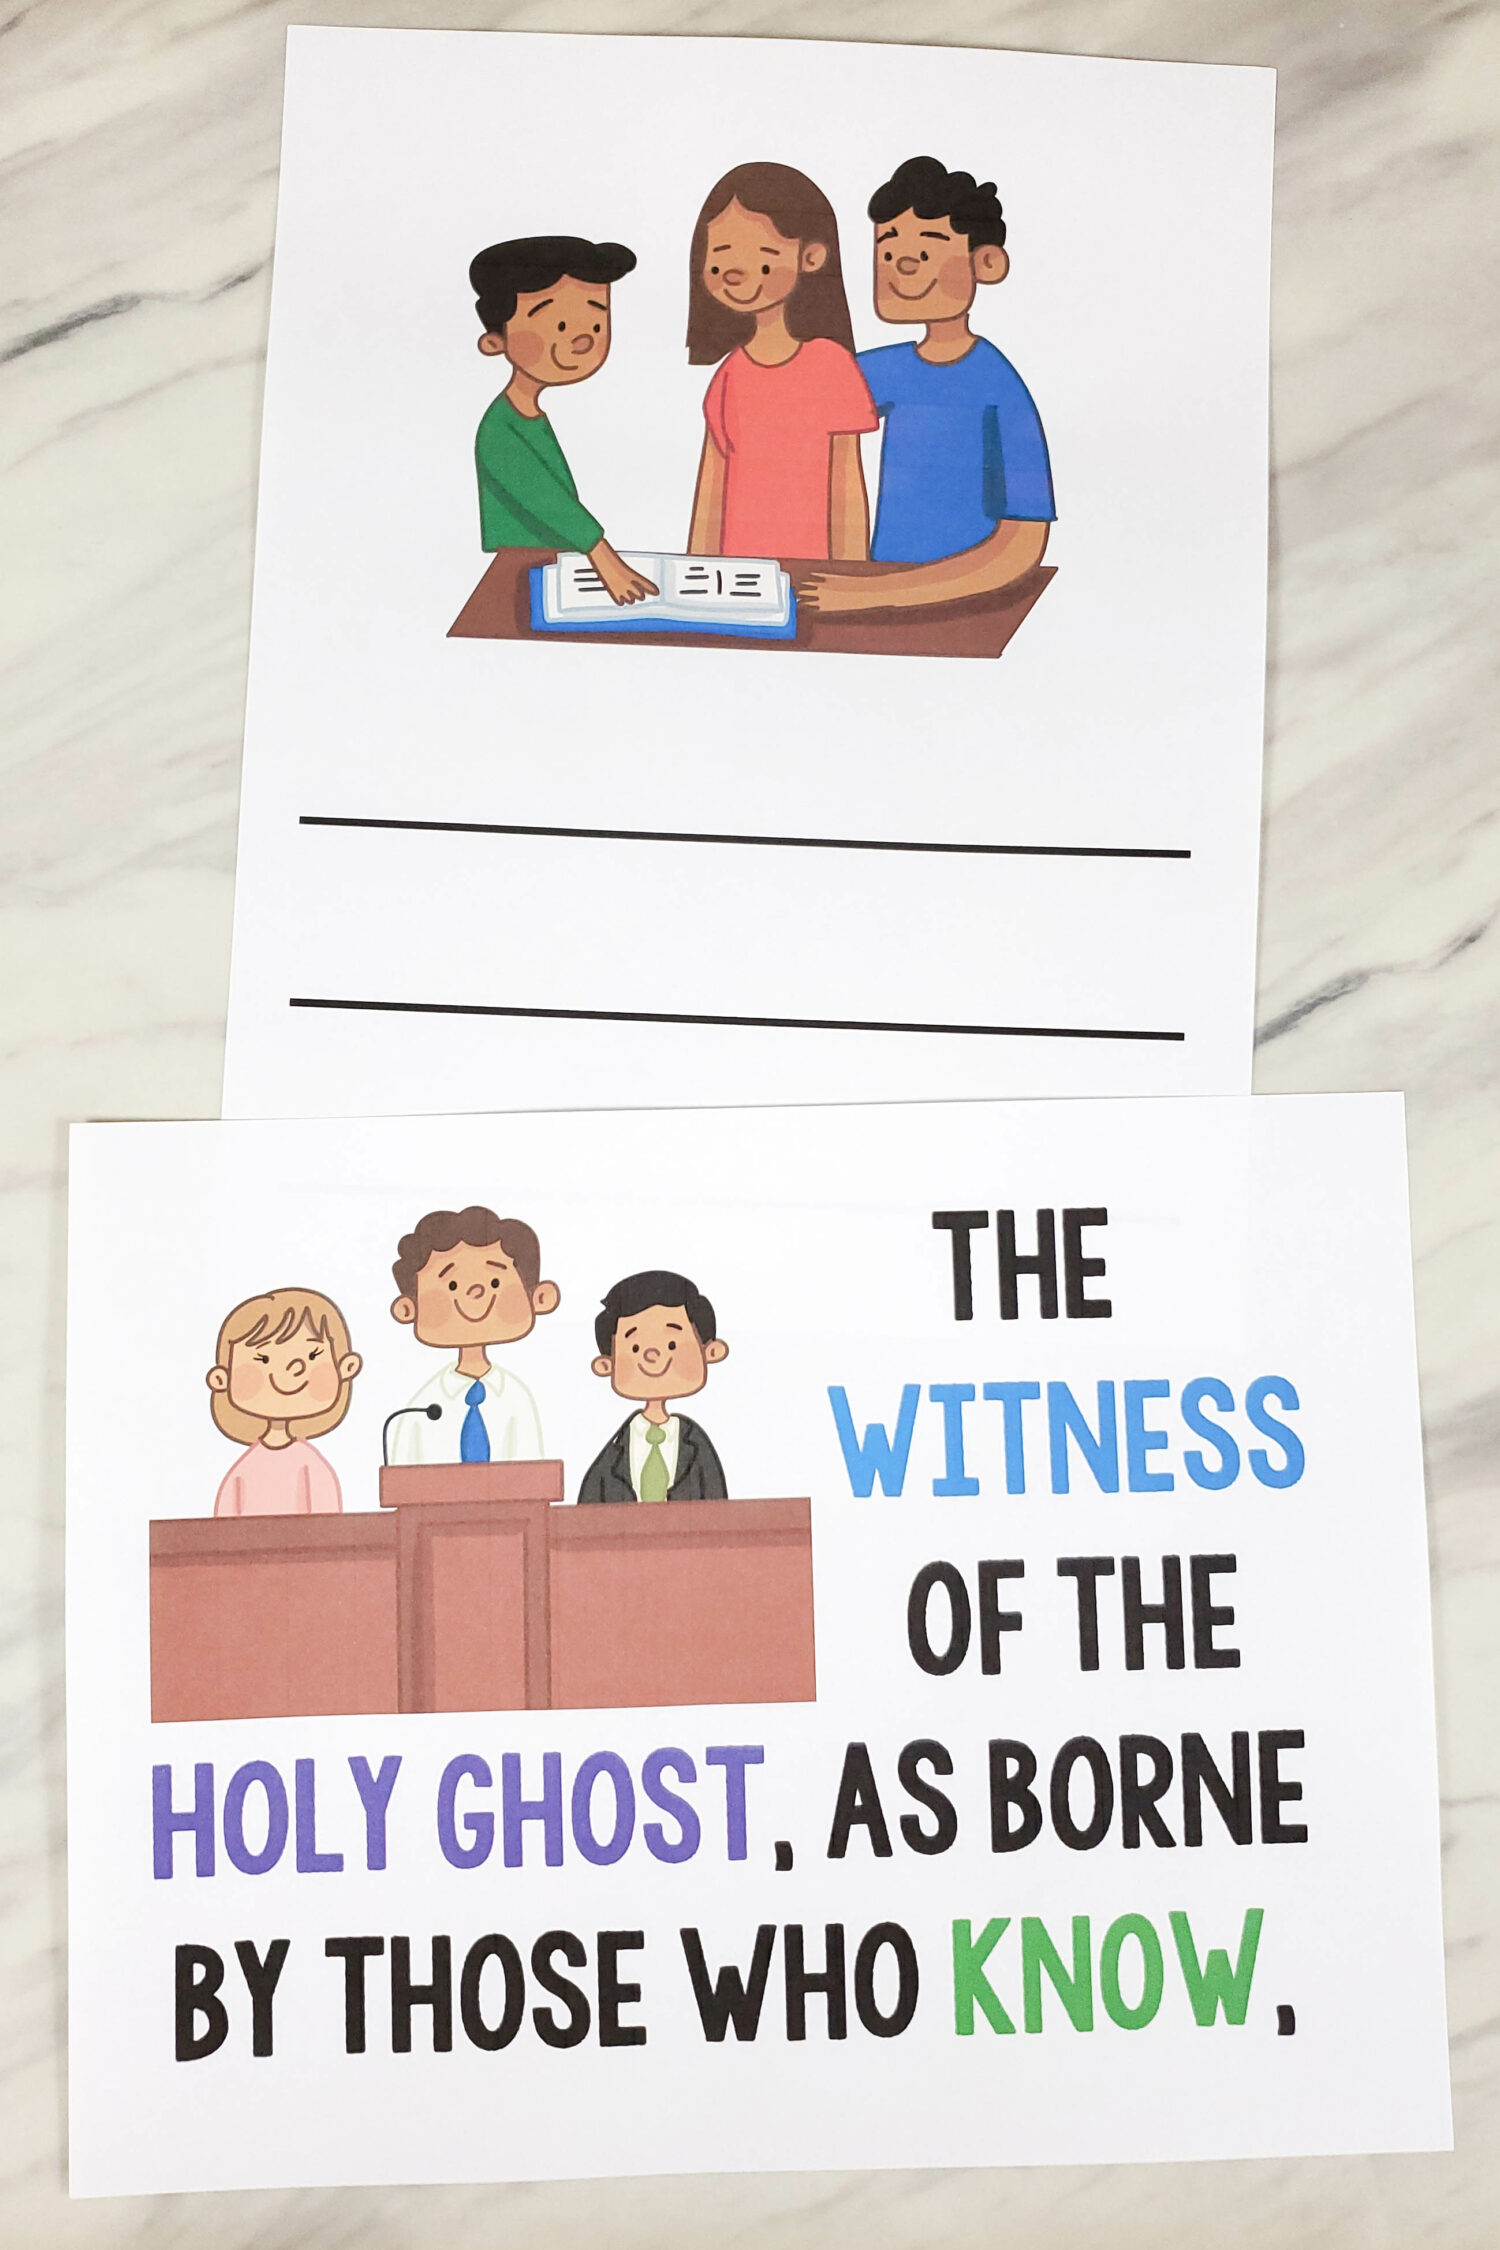 Testimony Hymn Flip Chart for Primary Singing Time great visual aids to help teach this song for LDS Primary music leaders - illustration pictures and lyrics!